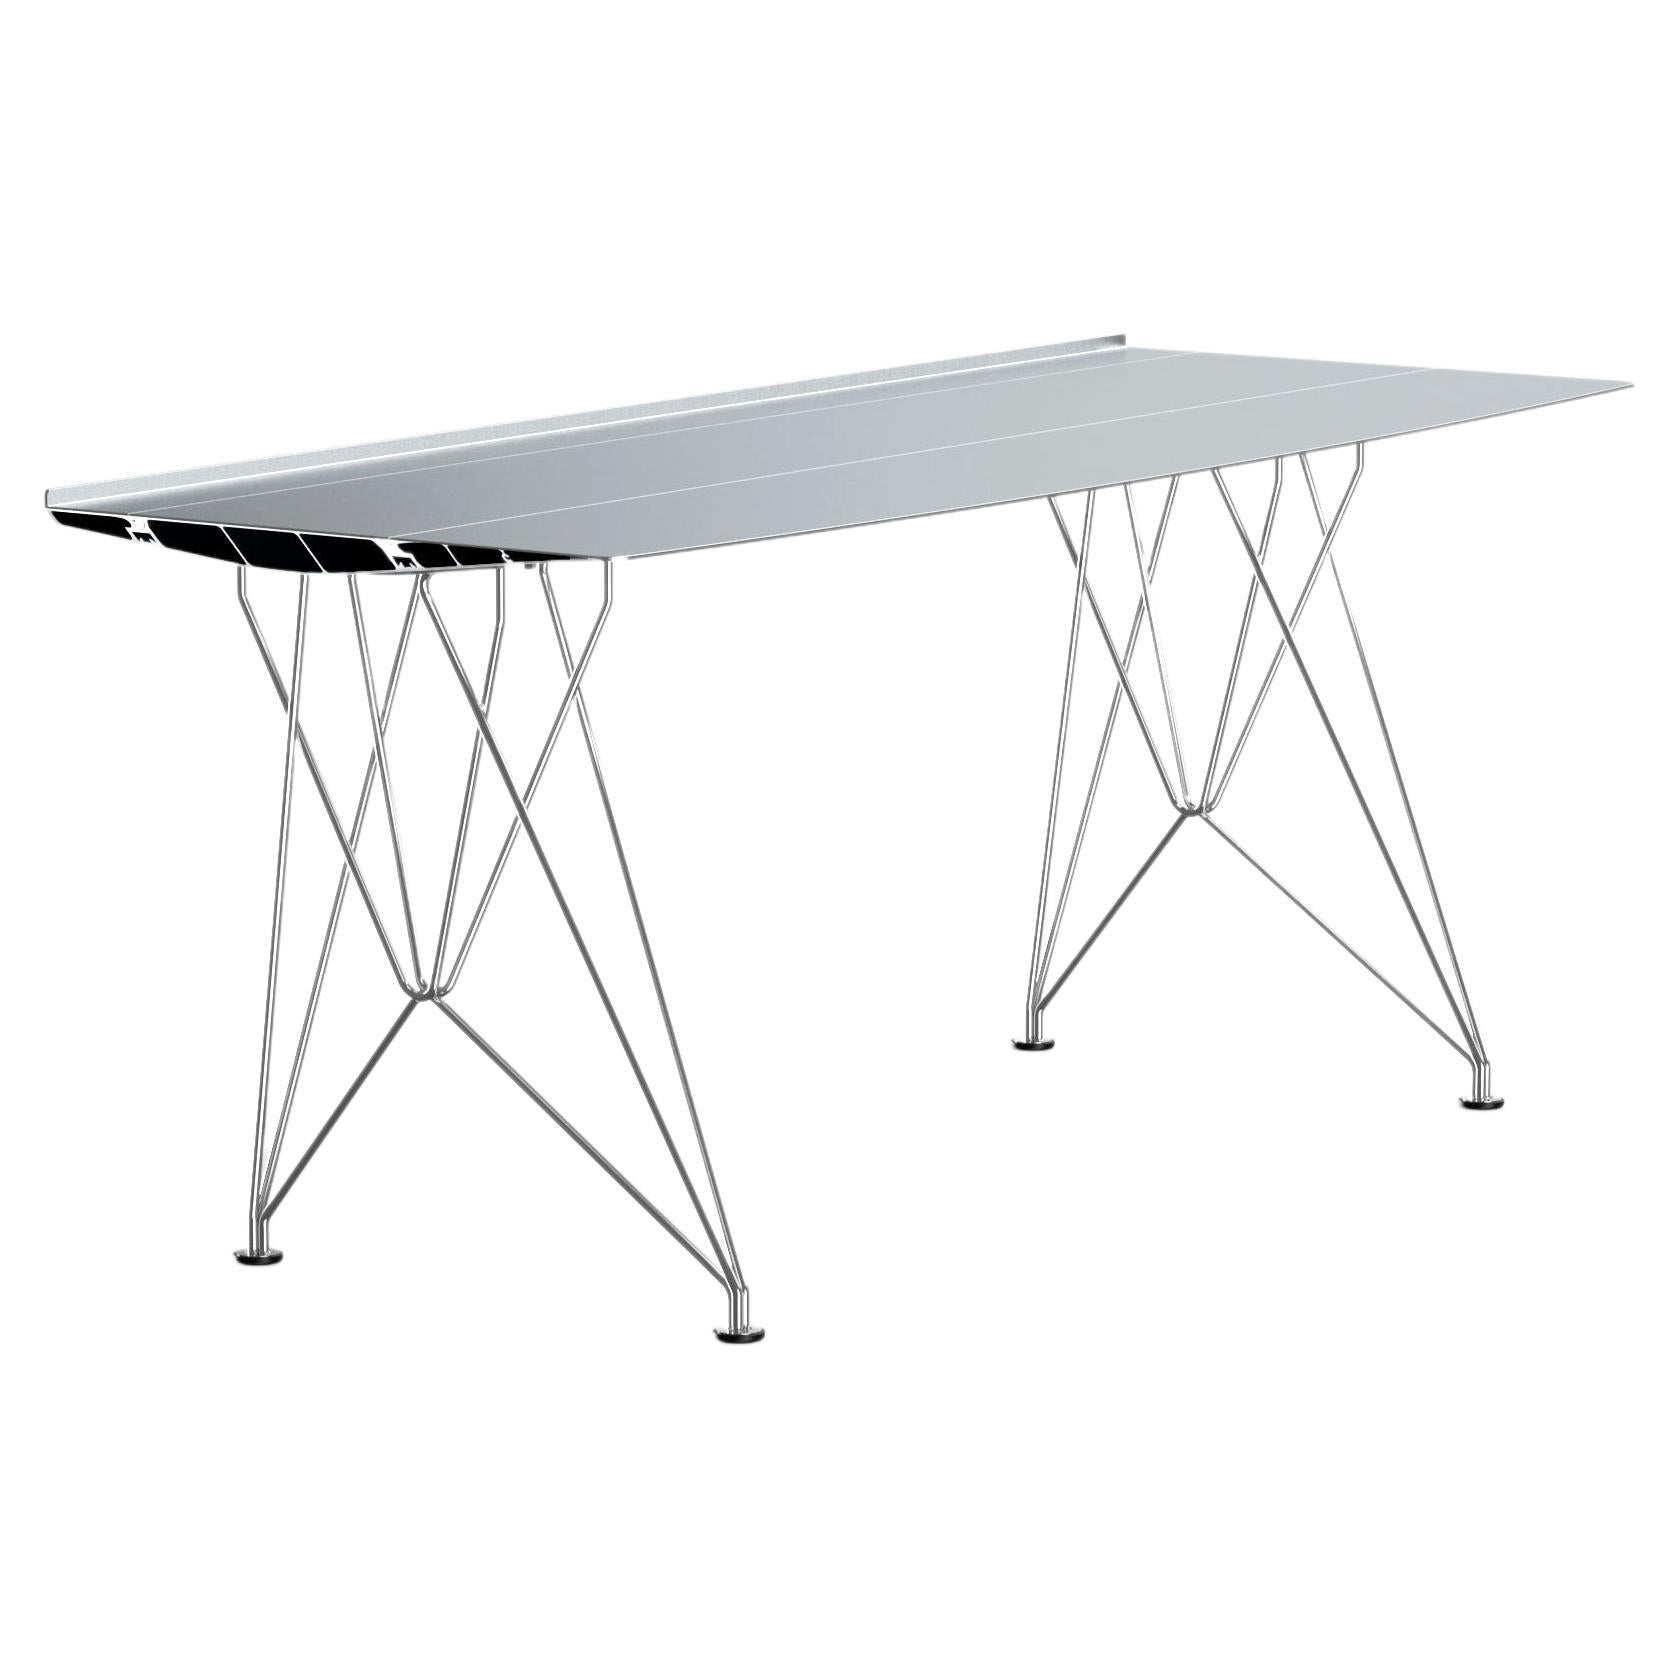 21stCentury Table B Desk Konstantin Grcic Top Anodized Silver with Inox Legs